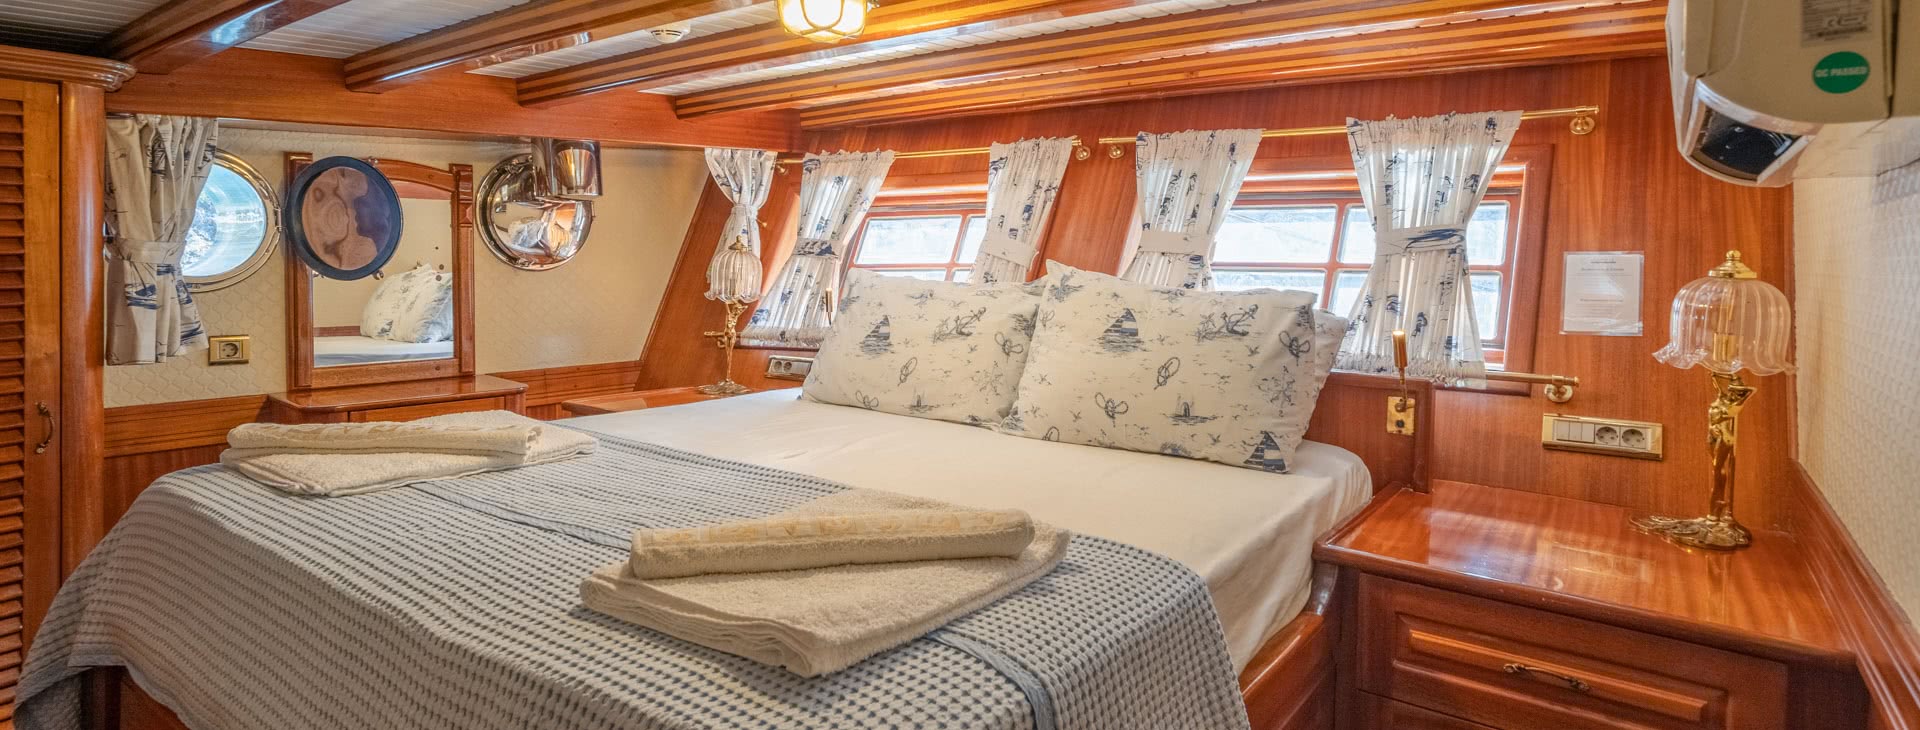 Bed in cabin on board the Admiral with clean folded towels